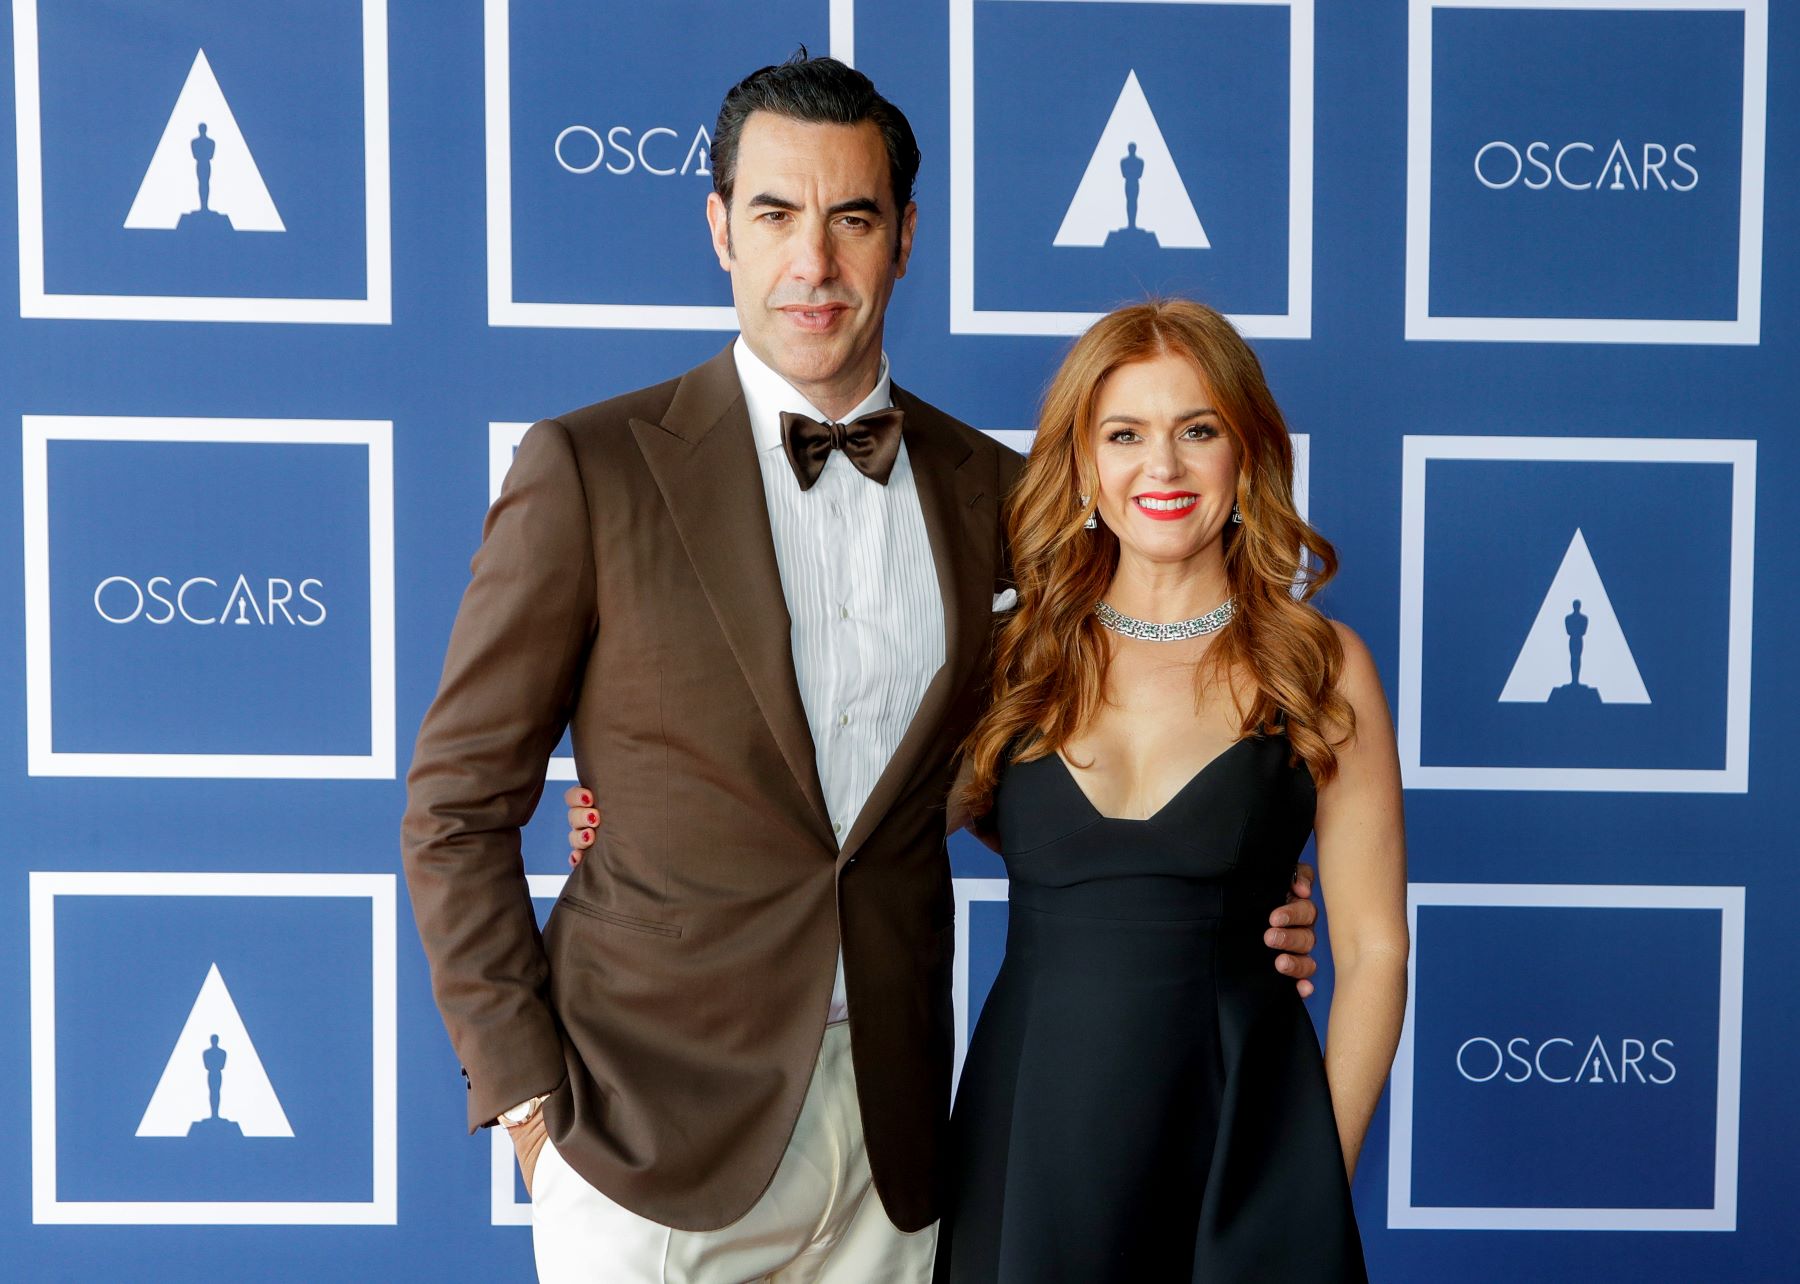 Sacha Baron Cohen and Isla Fisher attending a screening of the 93rd Annual Academy Awards (Oscars) in Sydney, Australia